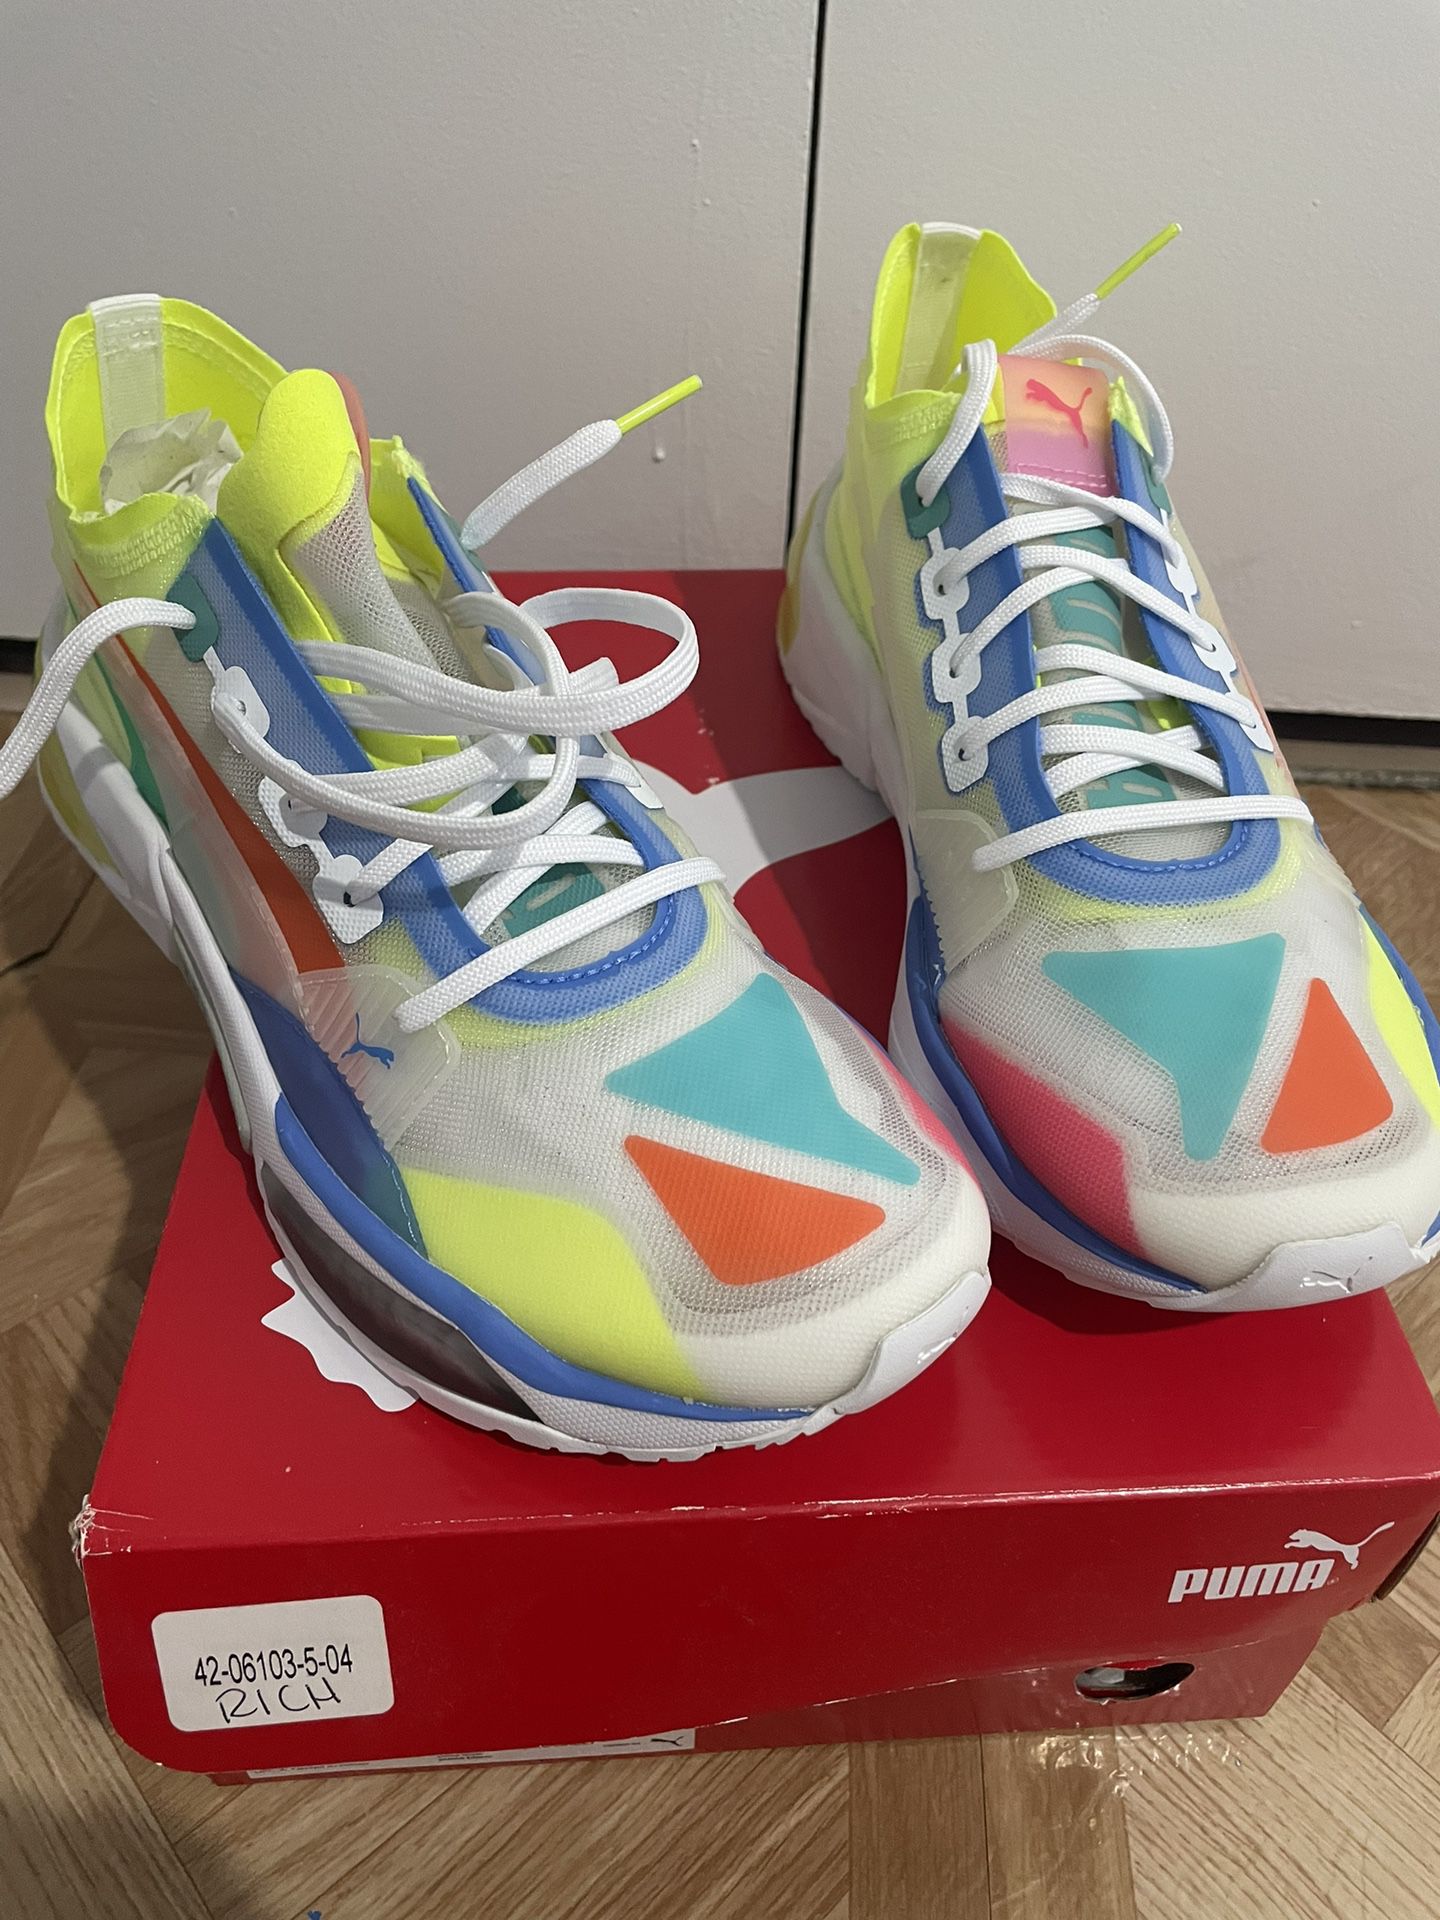 Puma Sneakers Size 9 Men for Sale in New York, NY -